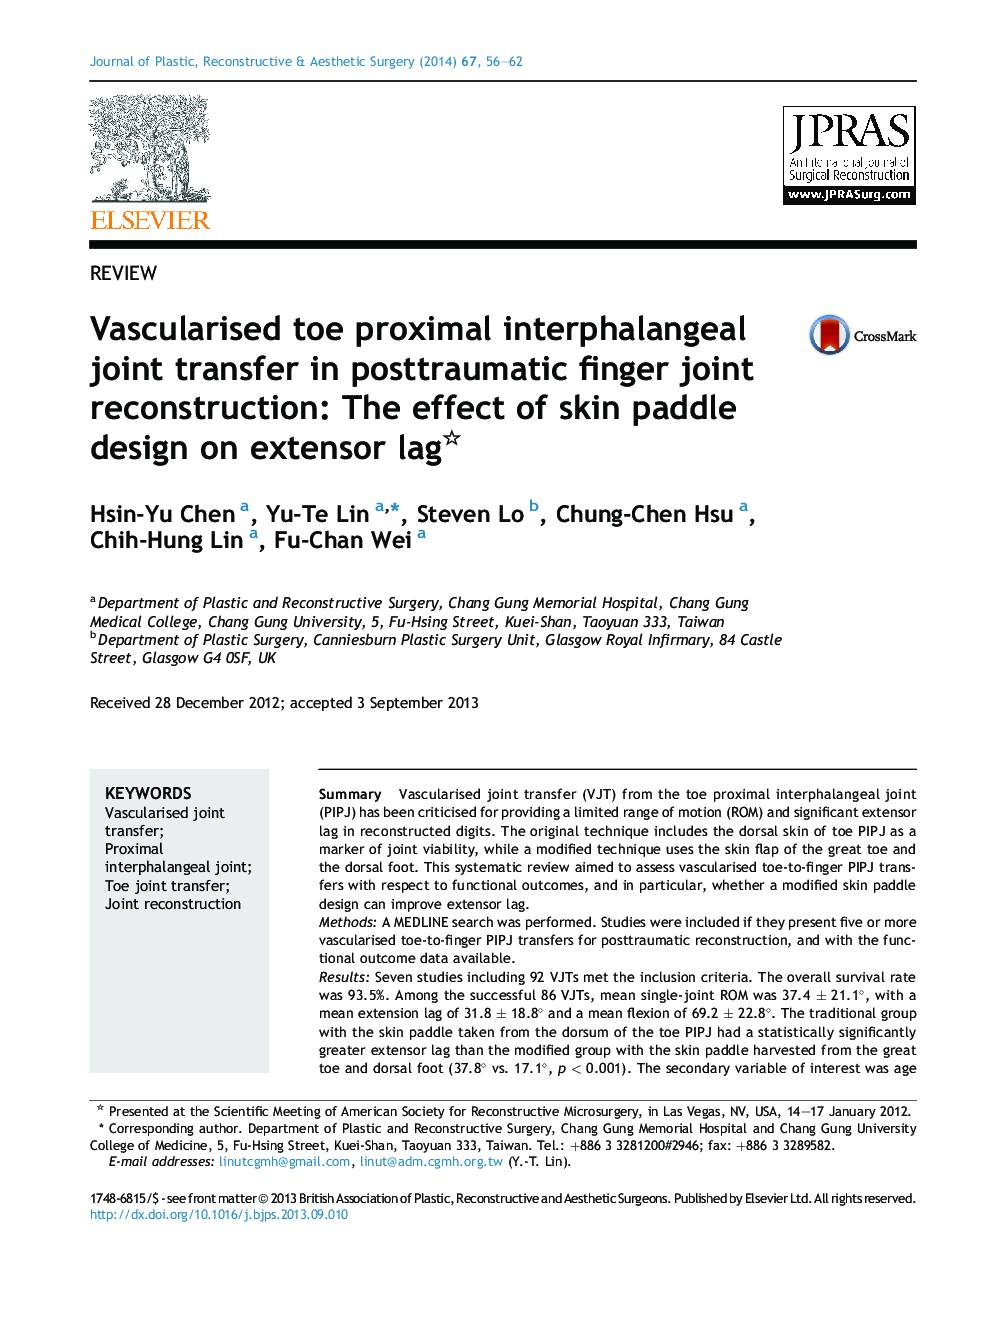 Vascularised toe proximal interphalangeal joint transfer in posttraumatic finger joint reconstruction: The effect of skin paddle design on extensor lag 